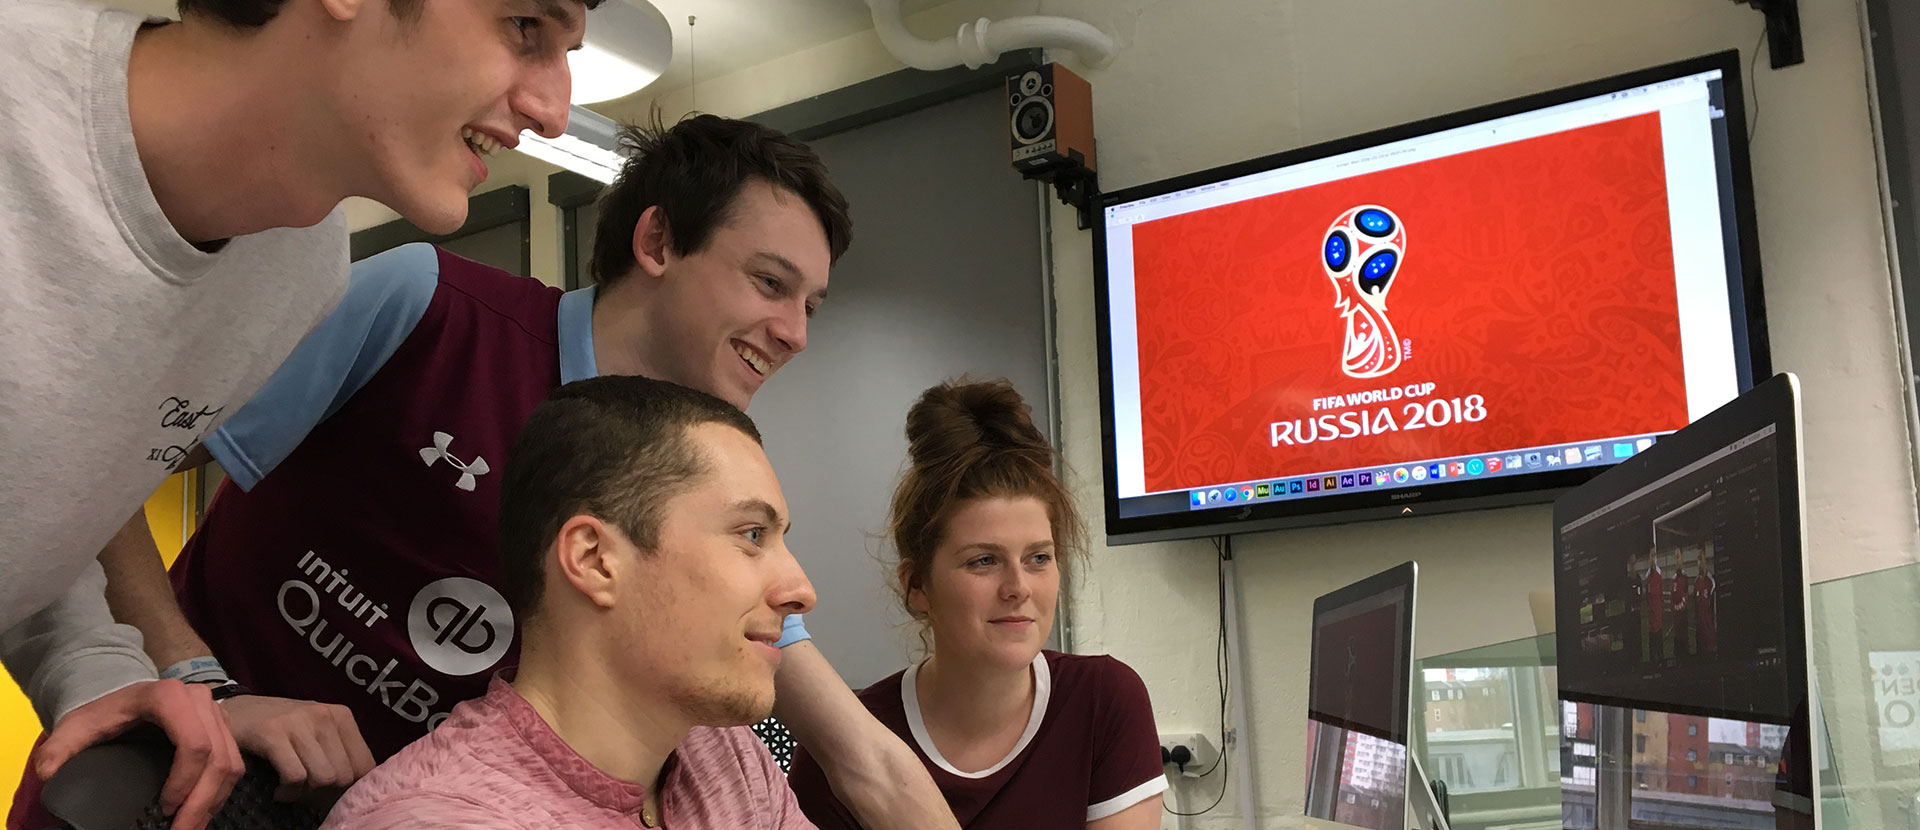 Sport journalism students getting ready for the 2018 World Cup in Russia